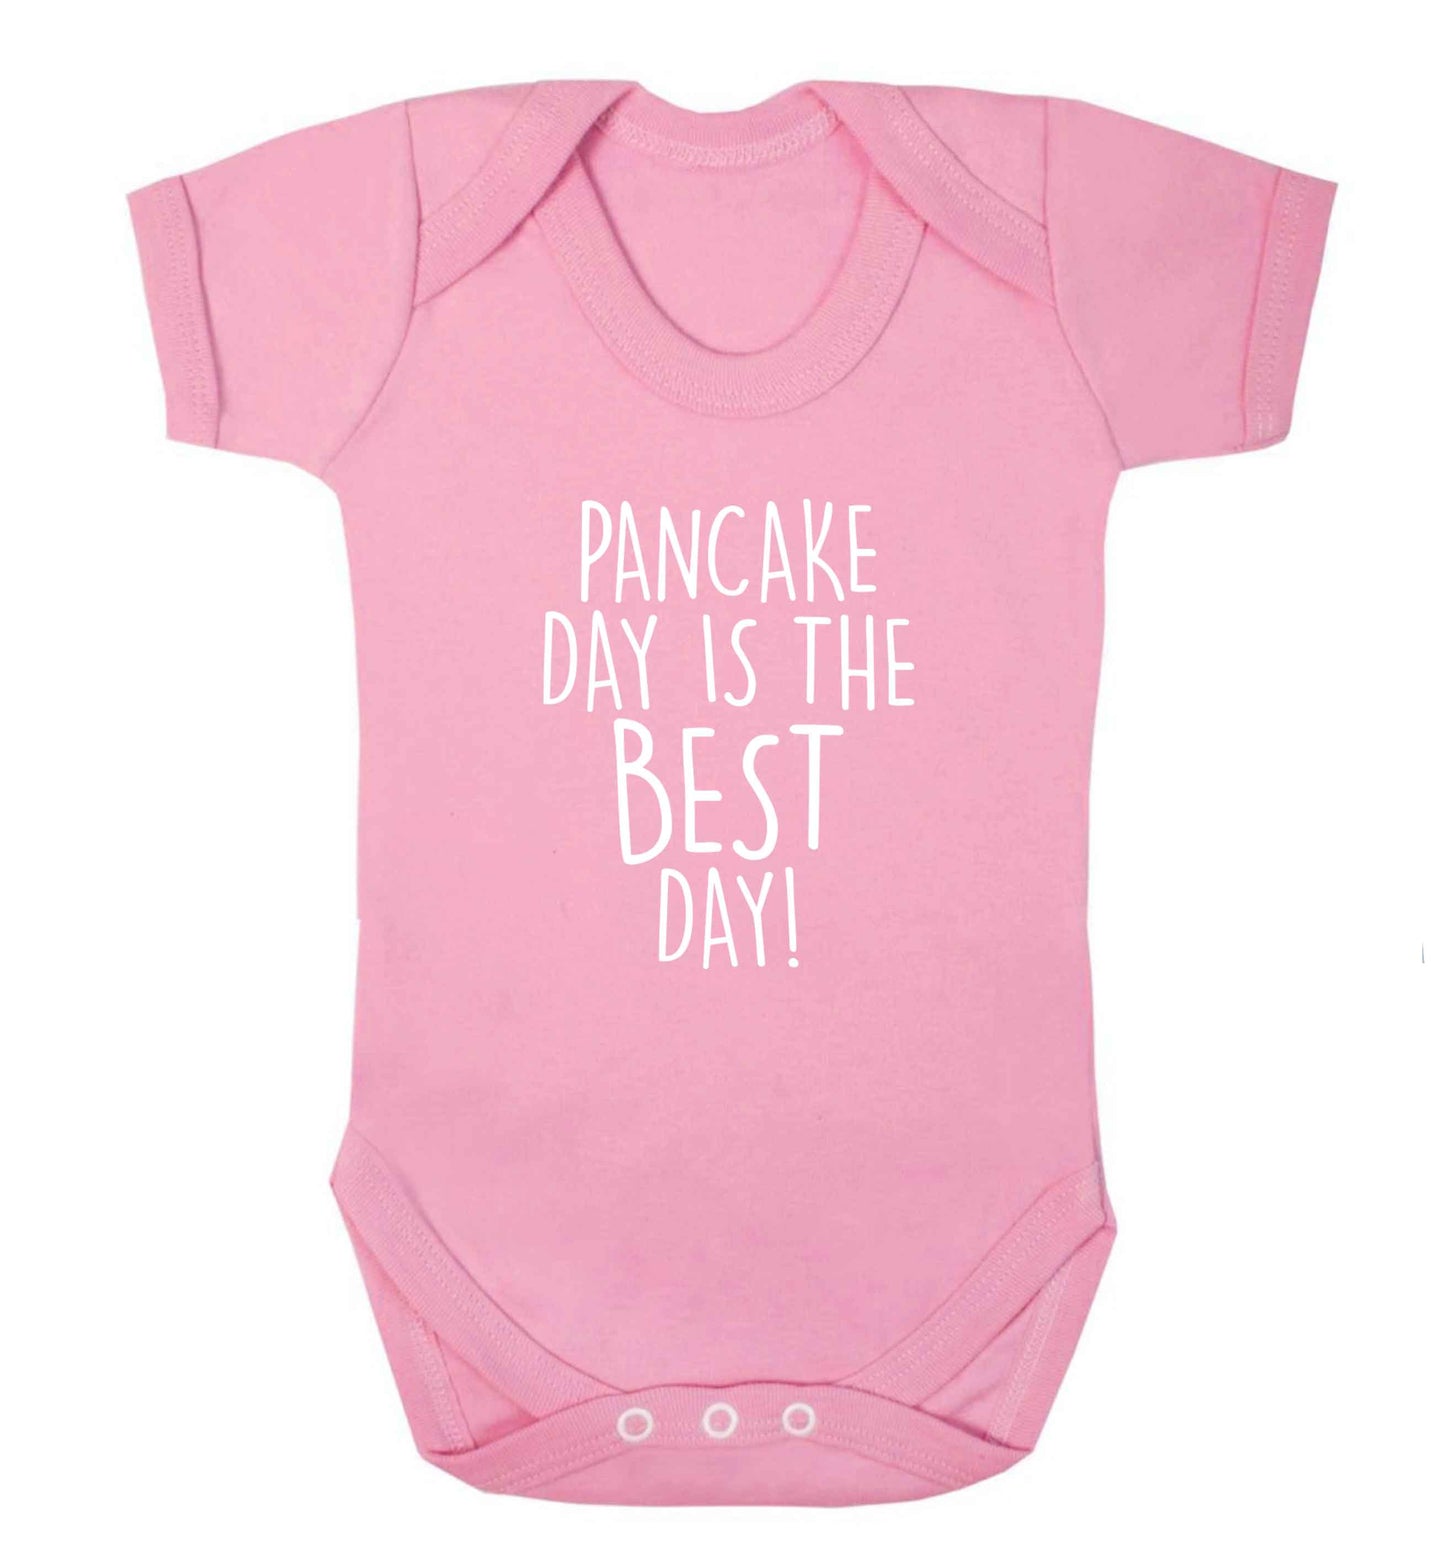 Pancake day is the best day baby vest pale pink 18-24 months